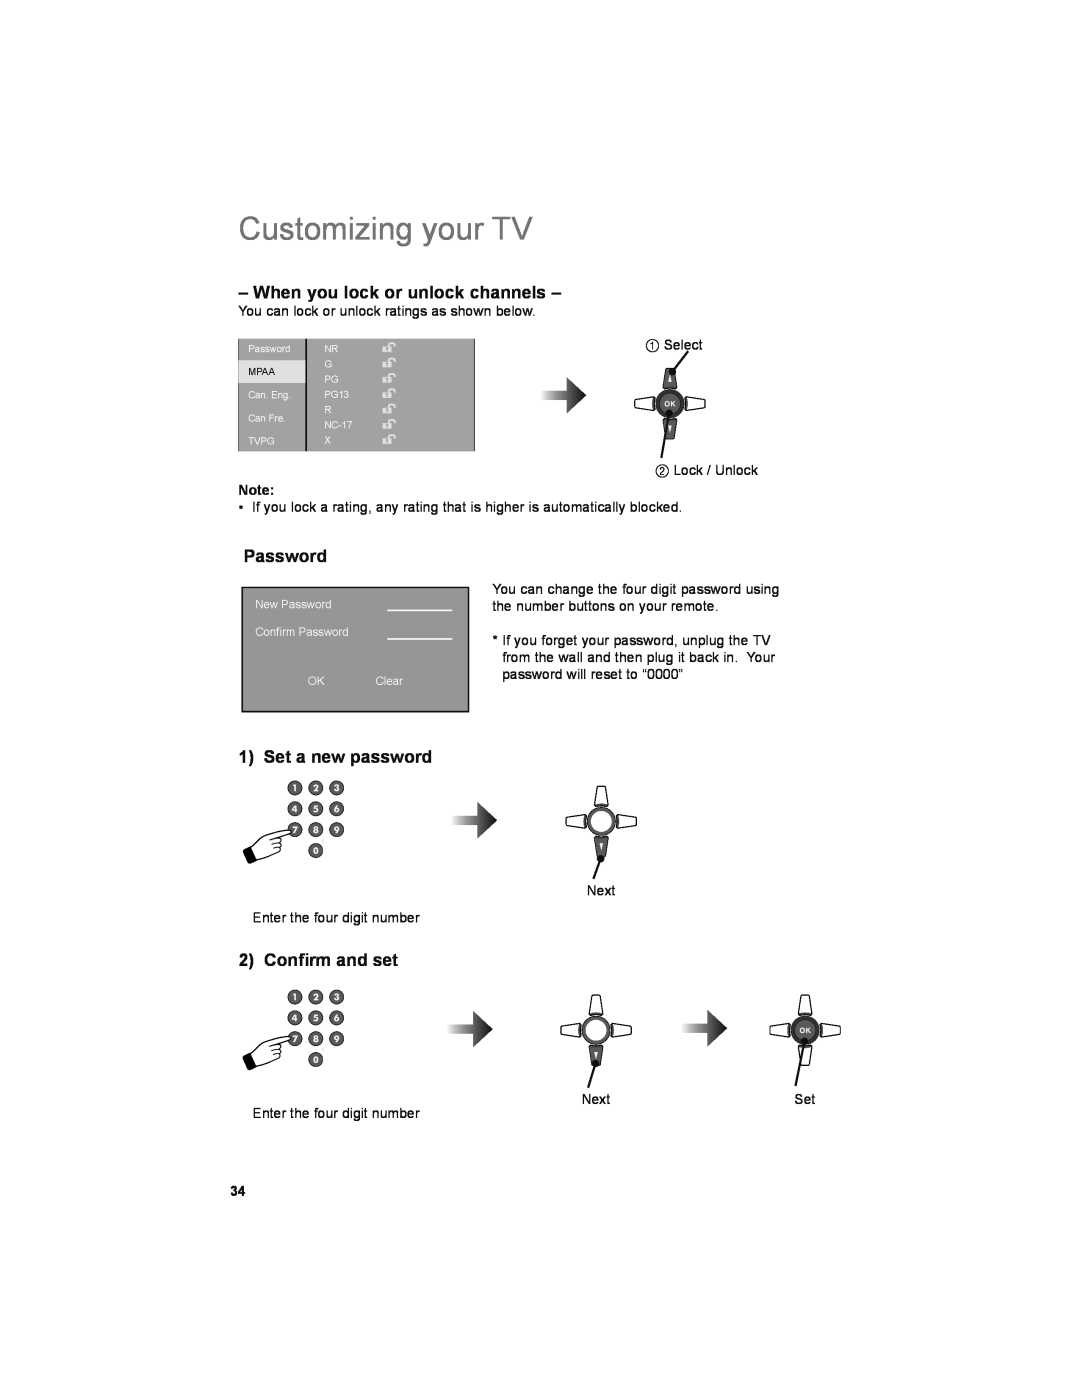 JVC LT-32JM30 manual Customizing your TV, When you lock or unlock channels, Password, Set a new password, 2 Conﬁrm and set 